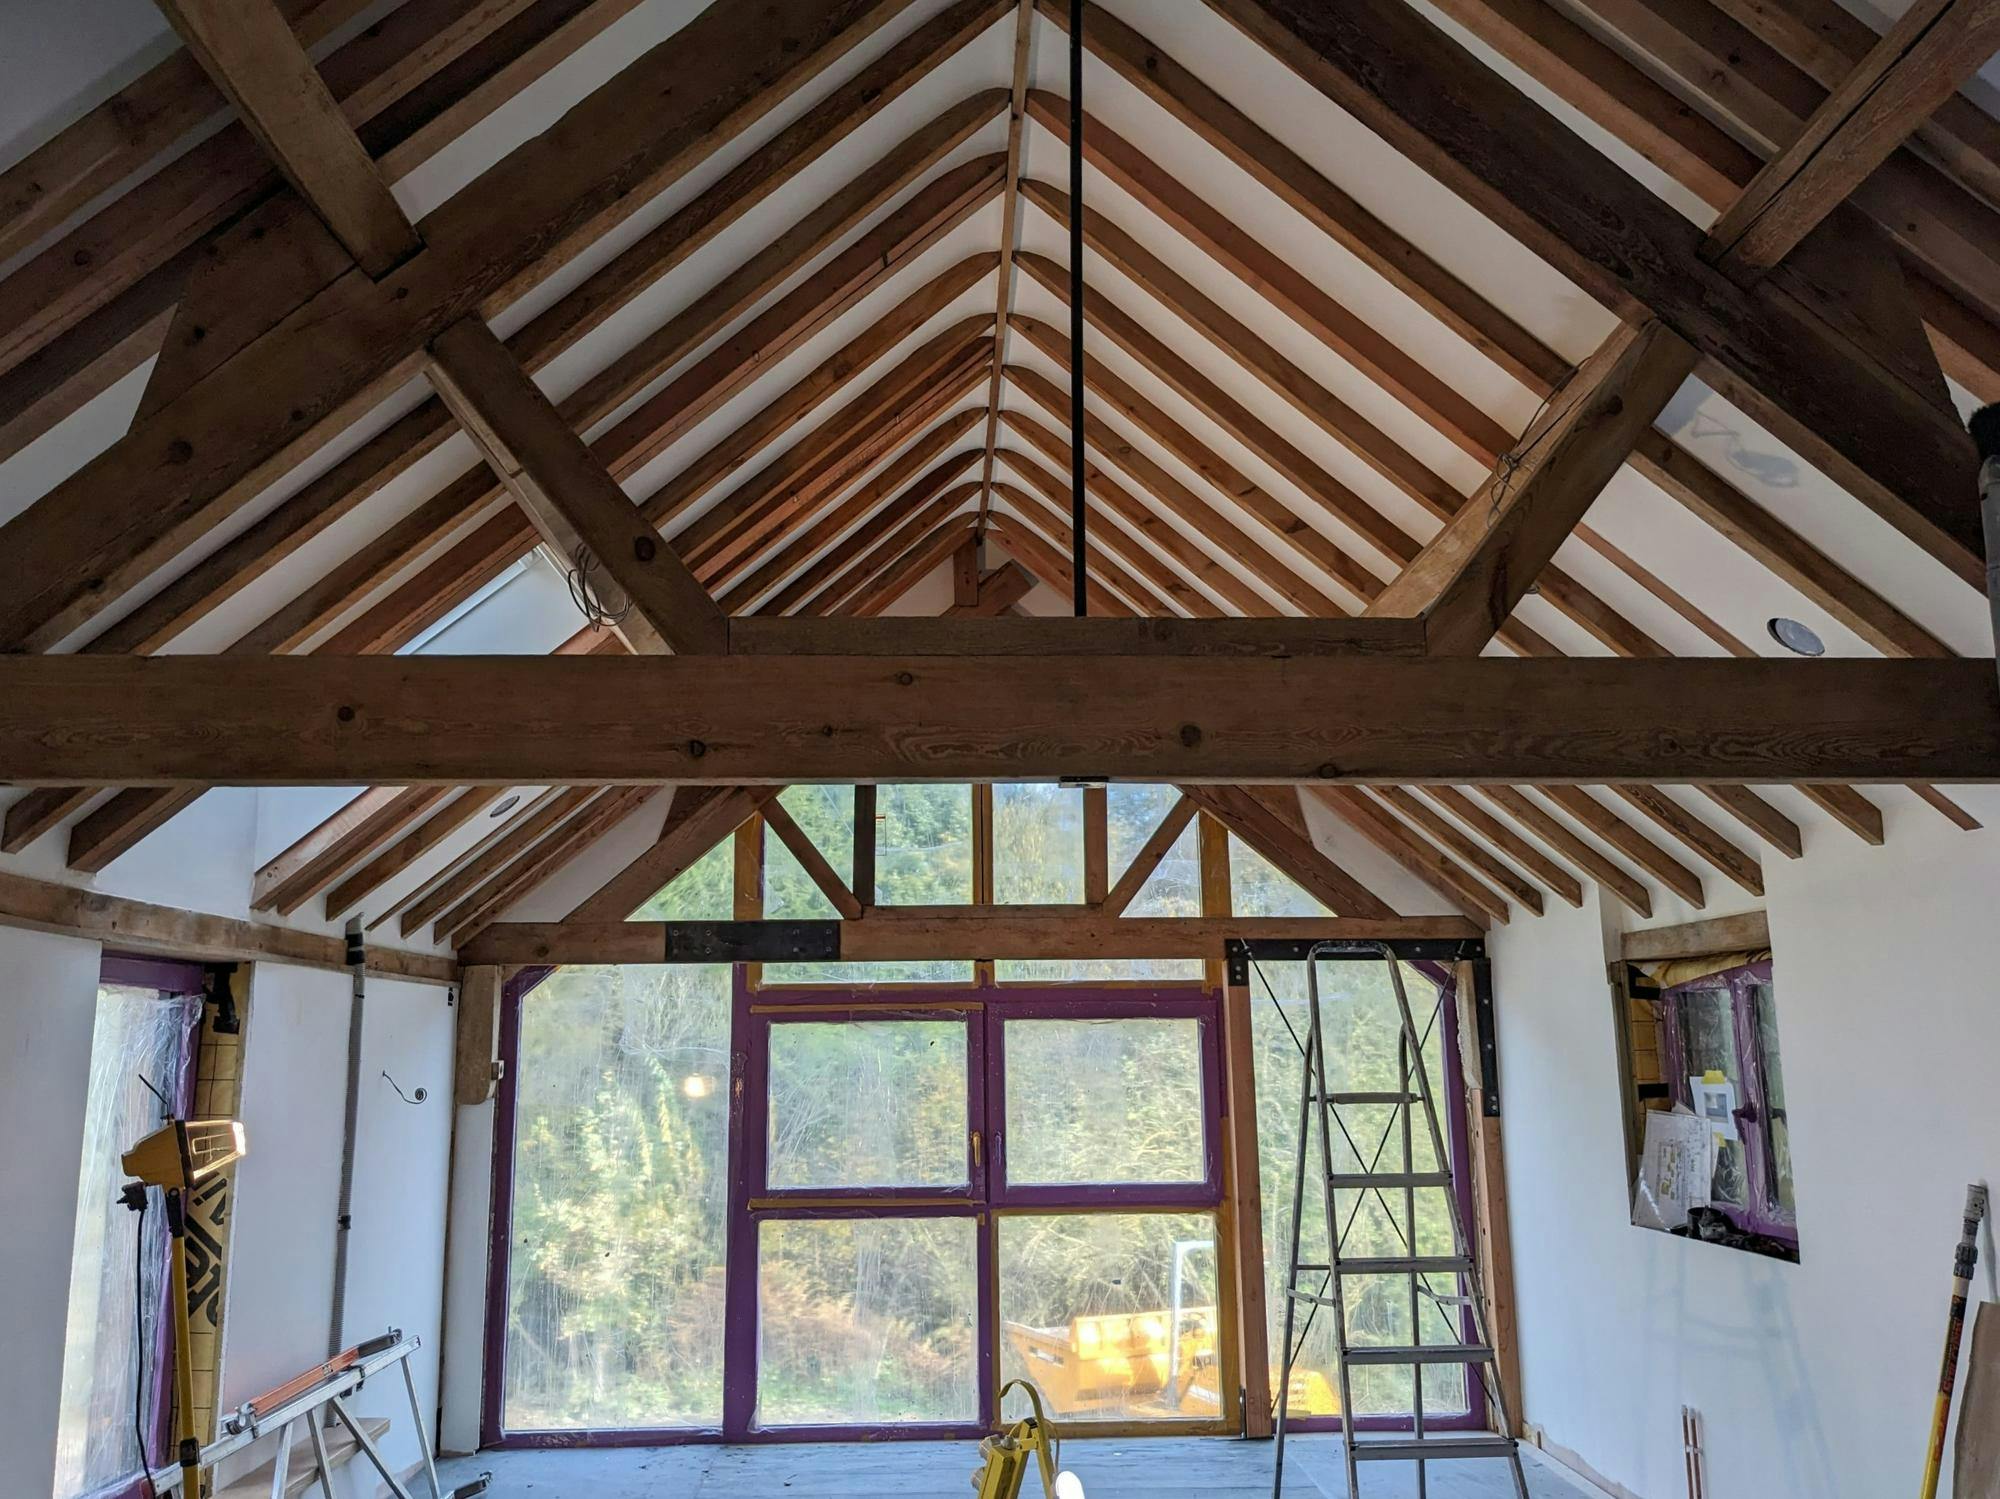 Internal view of timber rafters of the Shropshire Farm with white ceiling and walls